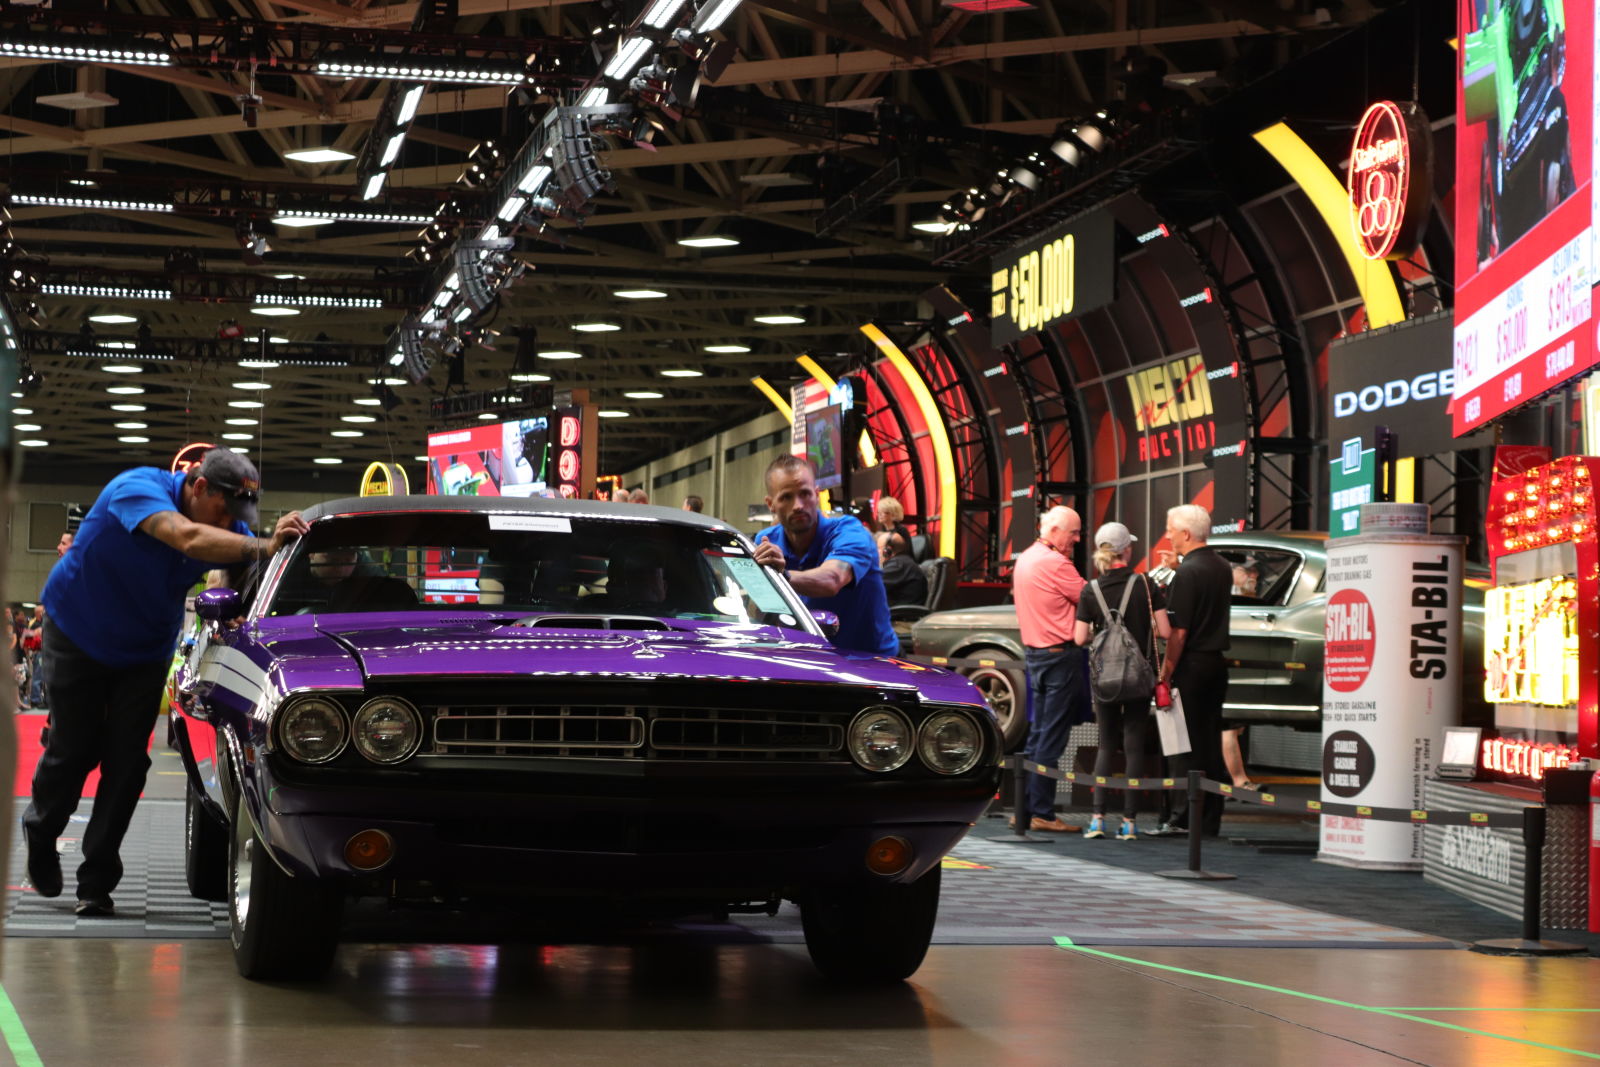 Illustration for article titled Mecum Dallas 2019 Has Something For Everyone